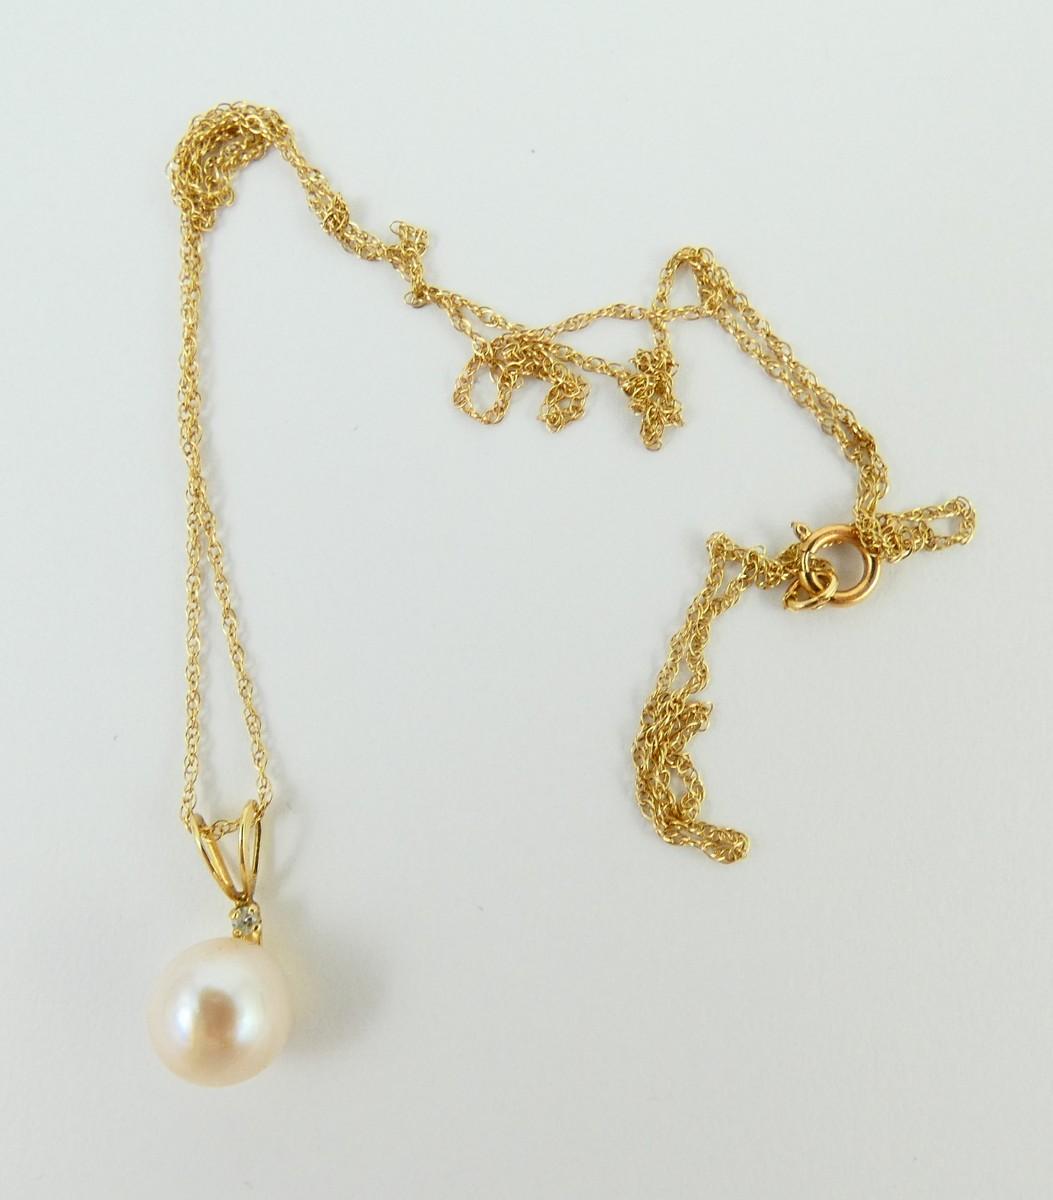 PEARL PENDANT ON CHAIN